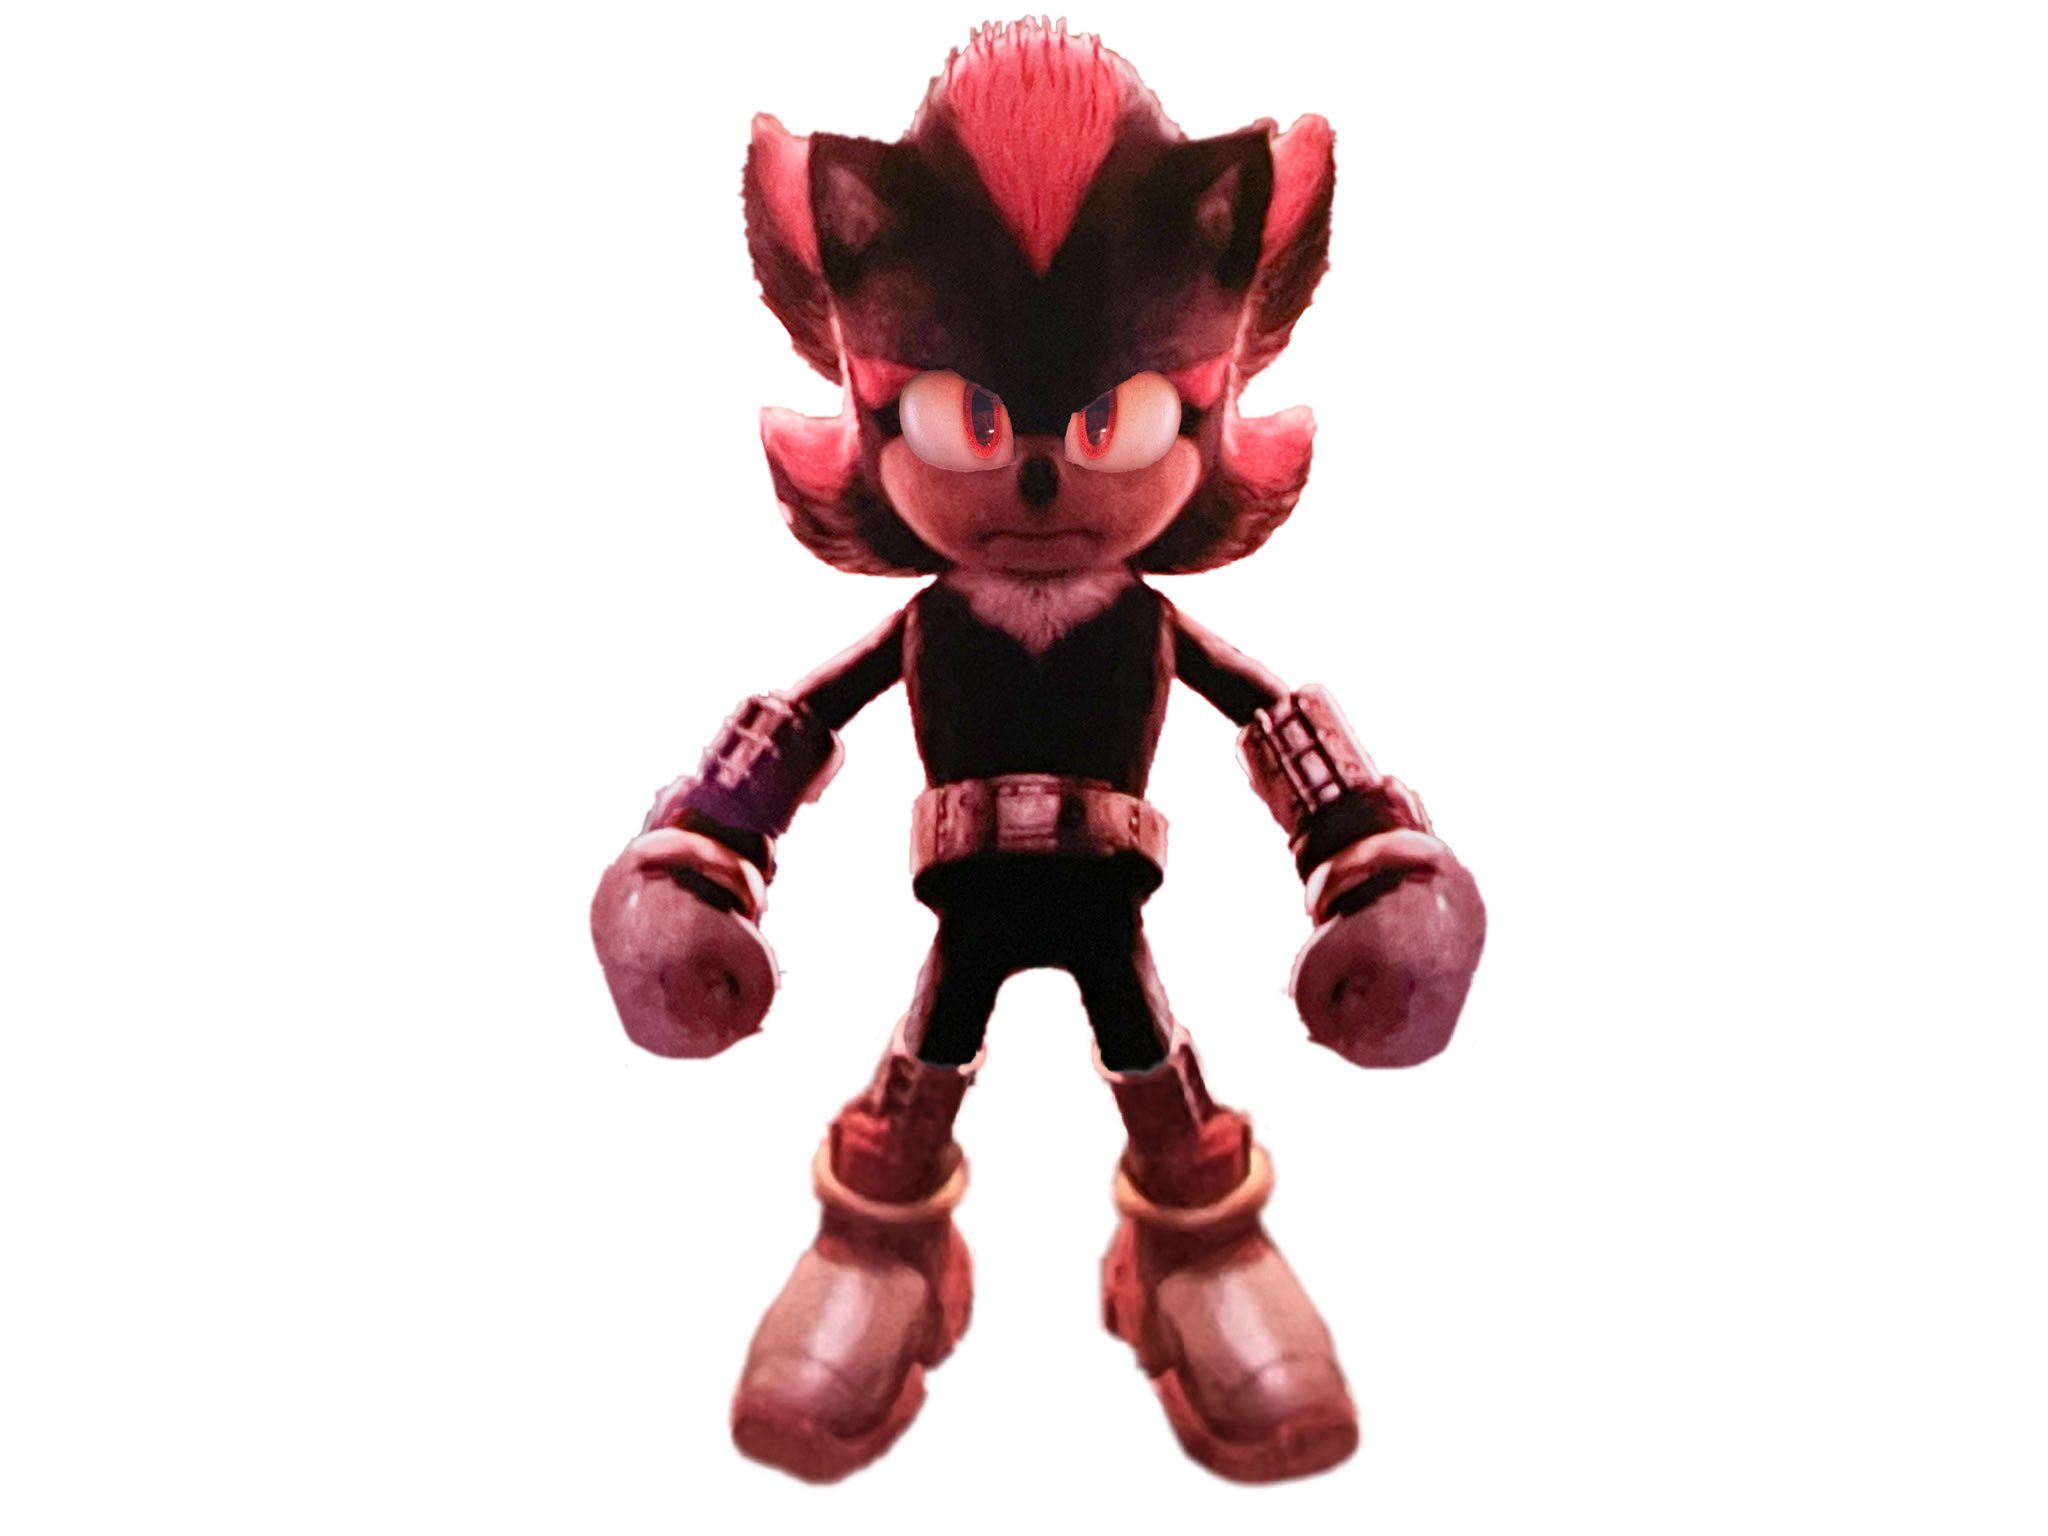 rogers on X: Here's Shadow the hedgehog. Created this in photoshop by  using photos of the end credits of sonic 2. #ShadowTheHedgehog #SonicMovie2  #SonicMovie  / X